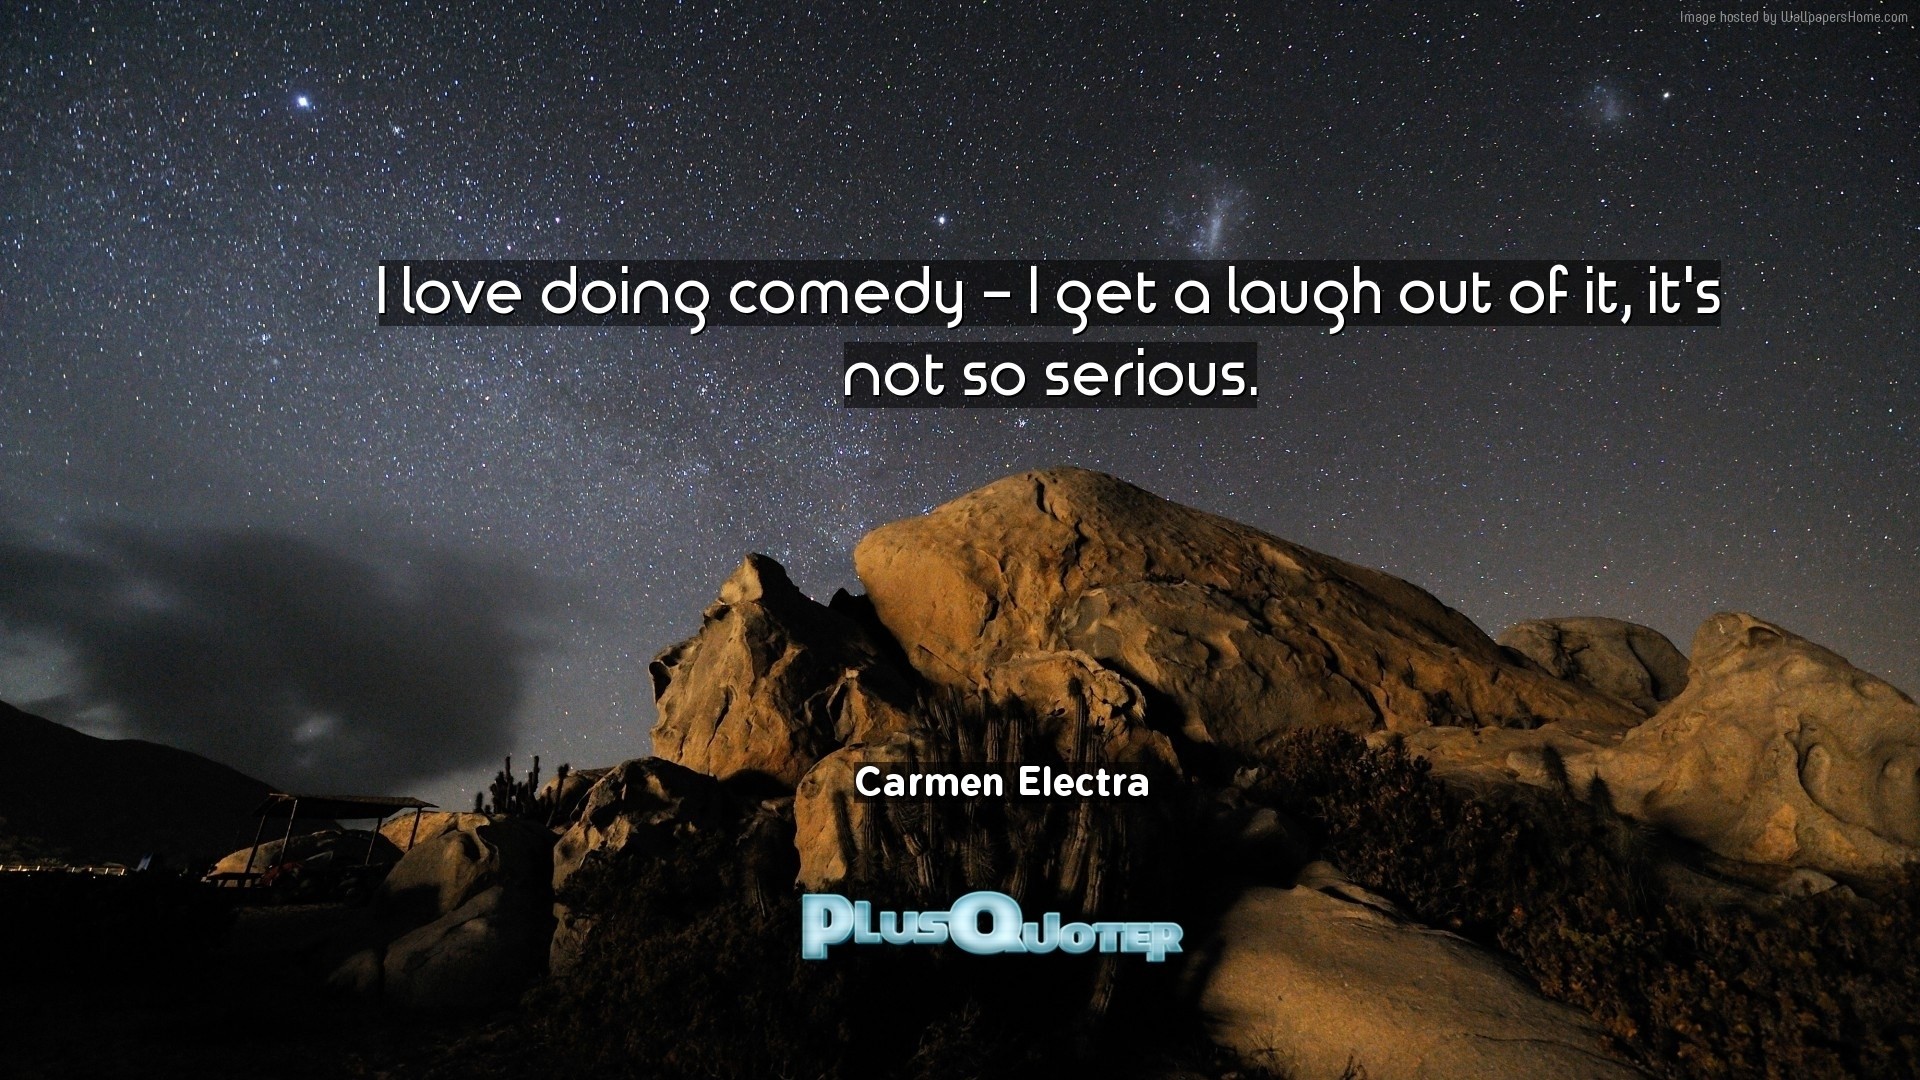 1920x1080 Download Wallpaper with inspirational Quotes- "I love doing comedy - I get  a laugh